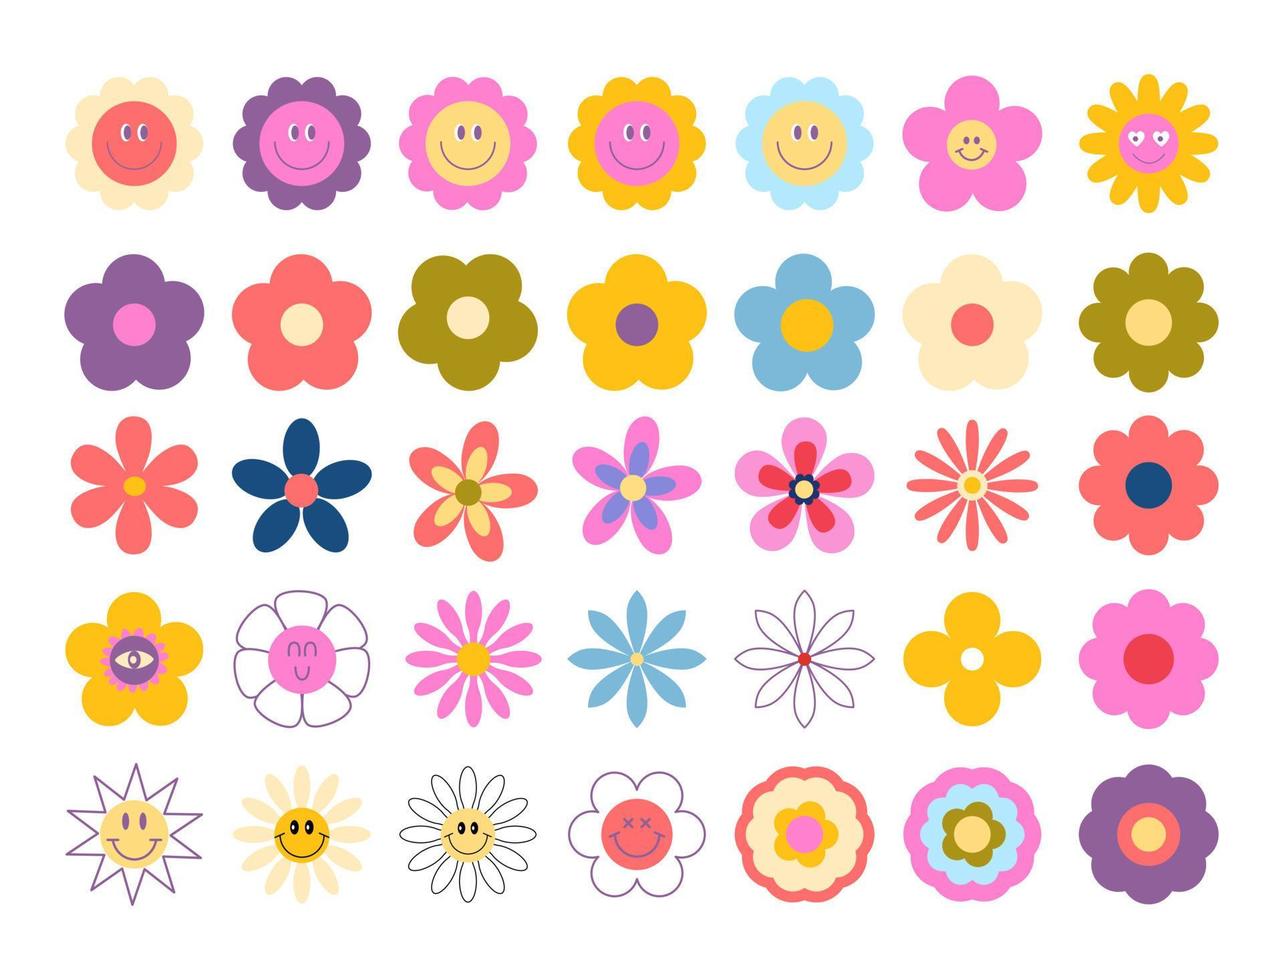 Set of cute 70s retro groovy flowers. Smiling daisies clipart. Isolated on white background. Hippie psychedelic vibes vector